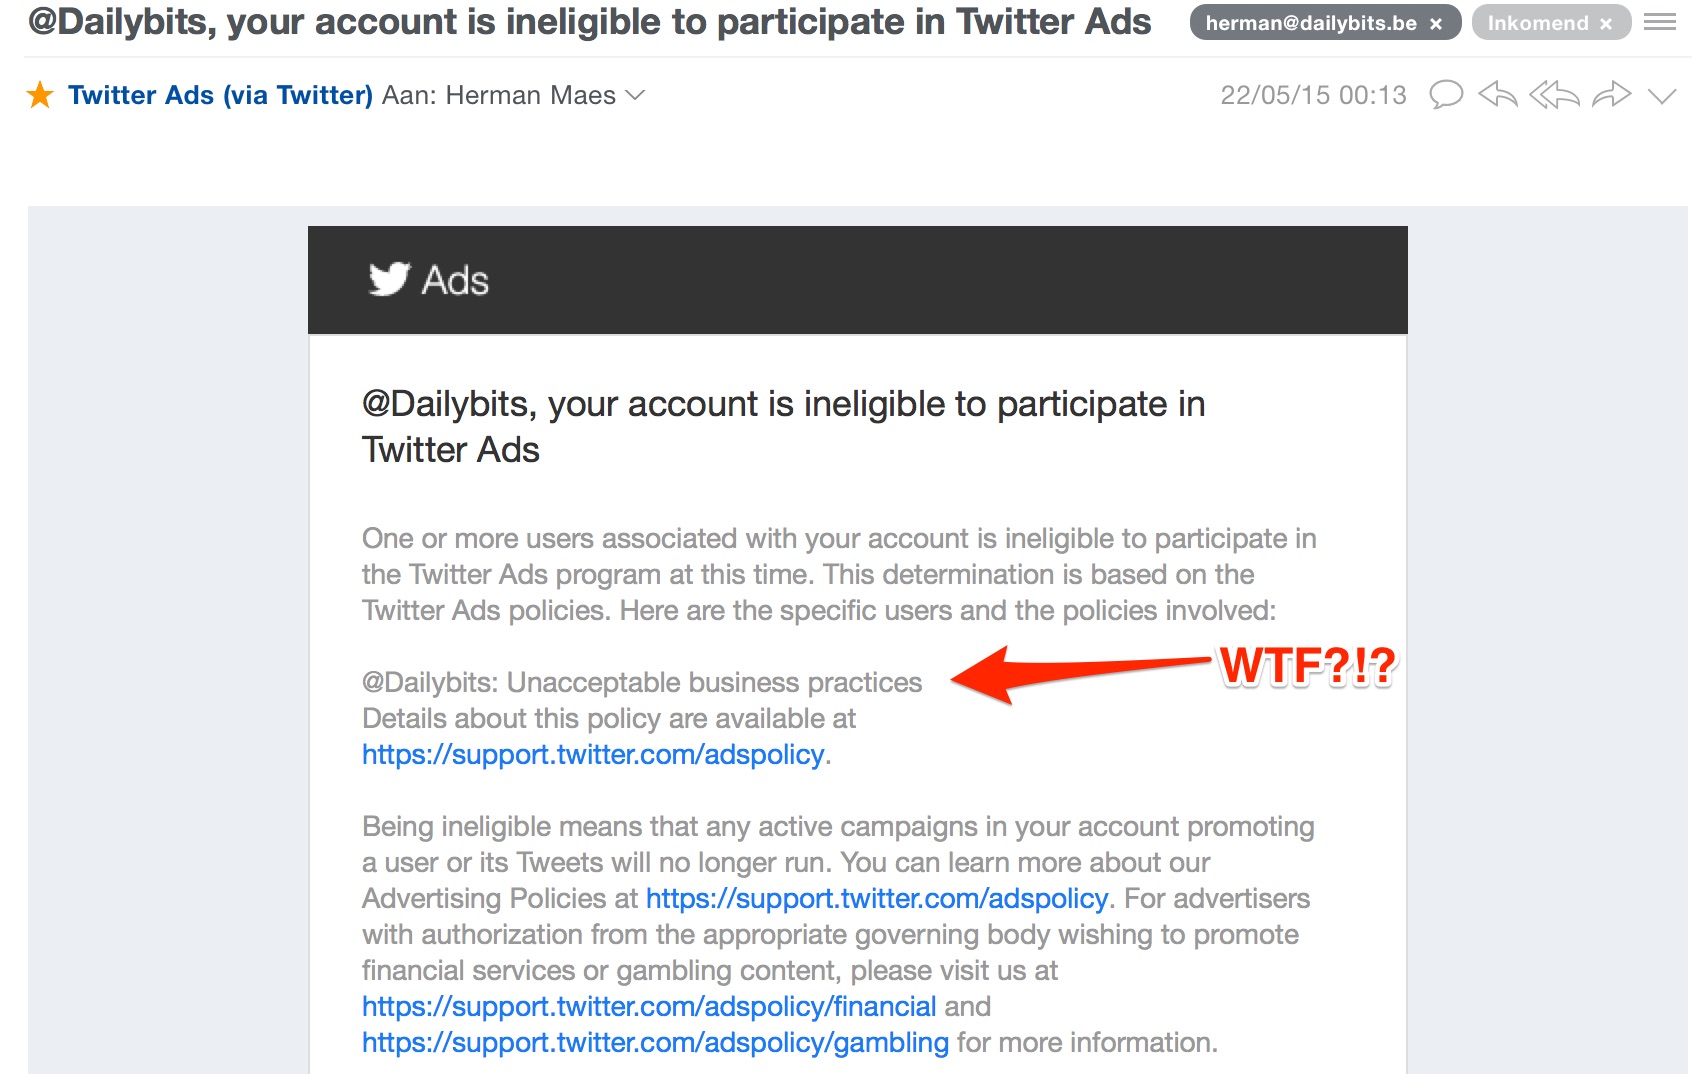 your_account_is_ineligible_to_participate_in_Twitter_Ads